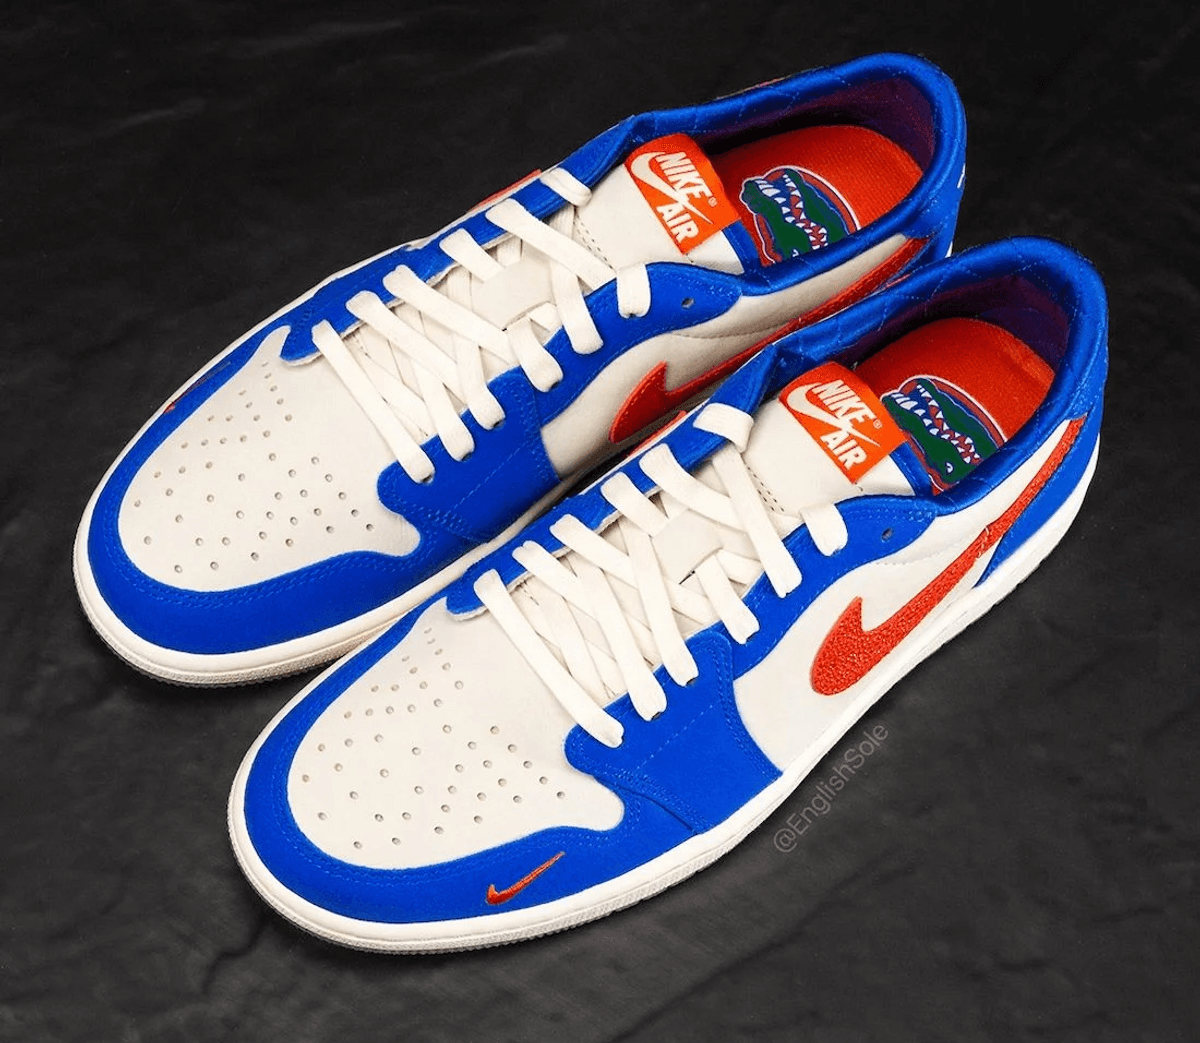 The Air Jordan 1 Low OG Florida Gators' PE Will Not Be Released To The Public